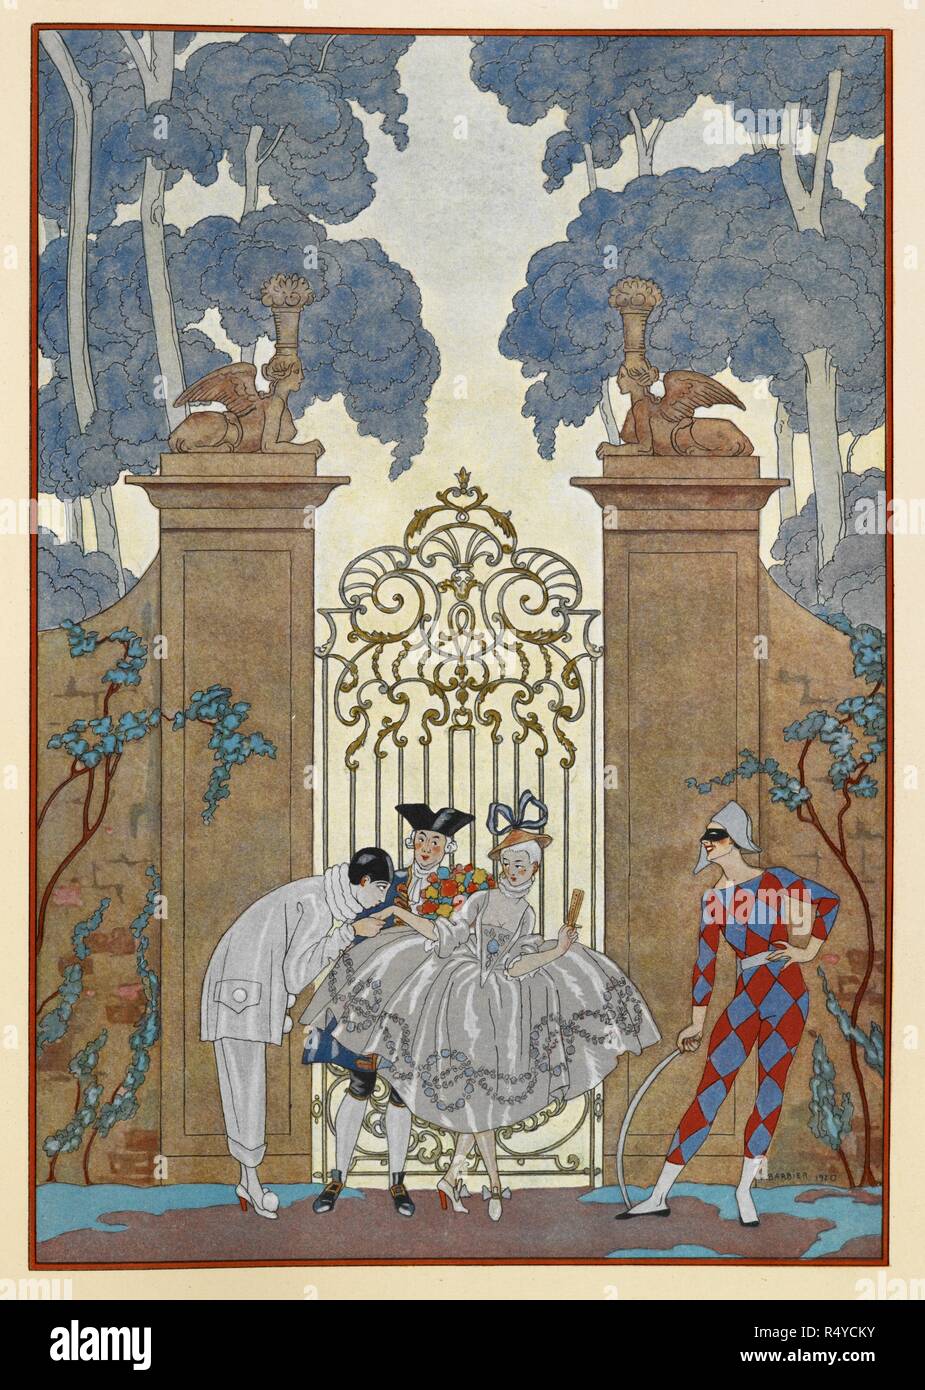 Colombine. People standing outside a gate. A Pierrot. FÃªtes galantes. [PoÃ¨mes]. Illustrations de George Barbier. Paris: H. Piazza, 1928. FÃªtes Galantes is an album consisting of romantic prints of French life among the upper classes of the 19th century. Rich aristocrats of the French court used to play gallant scenes from the commedia dellâ€™ arte that were called Fetes Galantes. The prints accompany Paul Verlaine's poetry. Each album contains 20 lithograph prints with pochoir highlighting by George Barbier. Source: L.45/2847, before 81. Language: French. Stock Photo